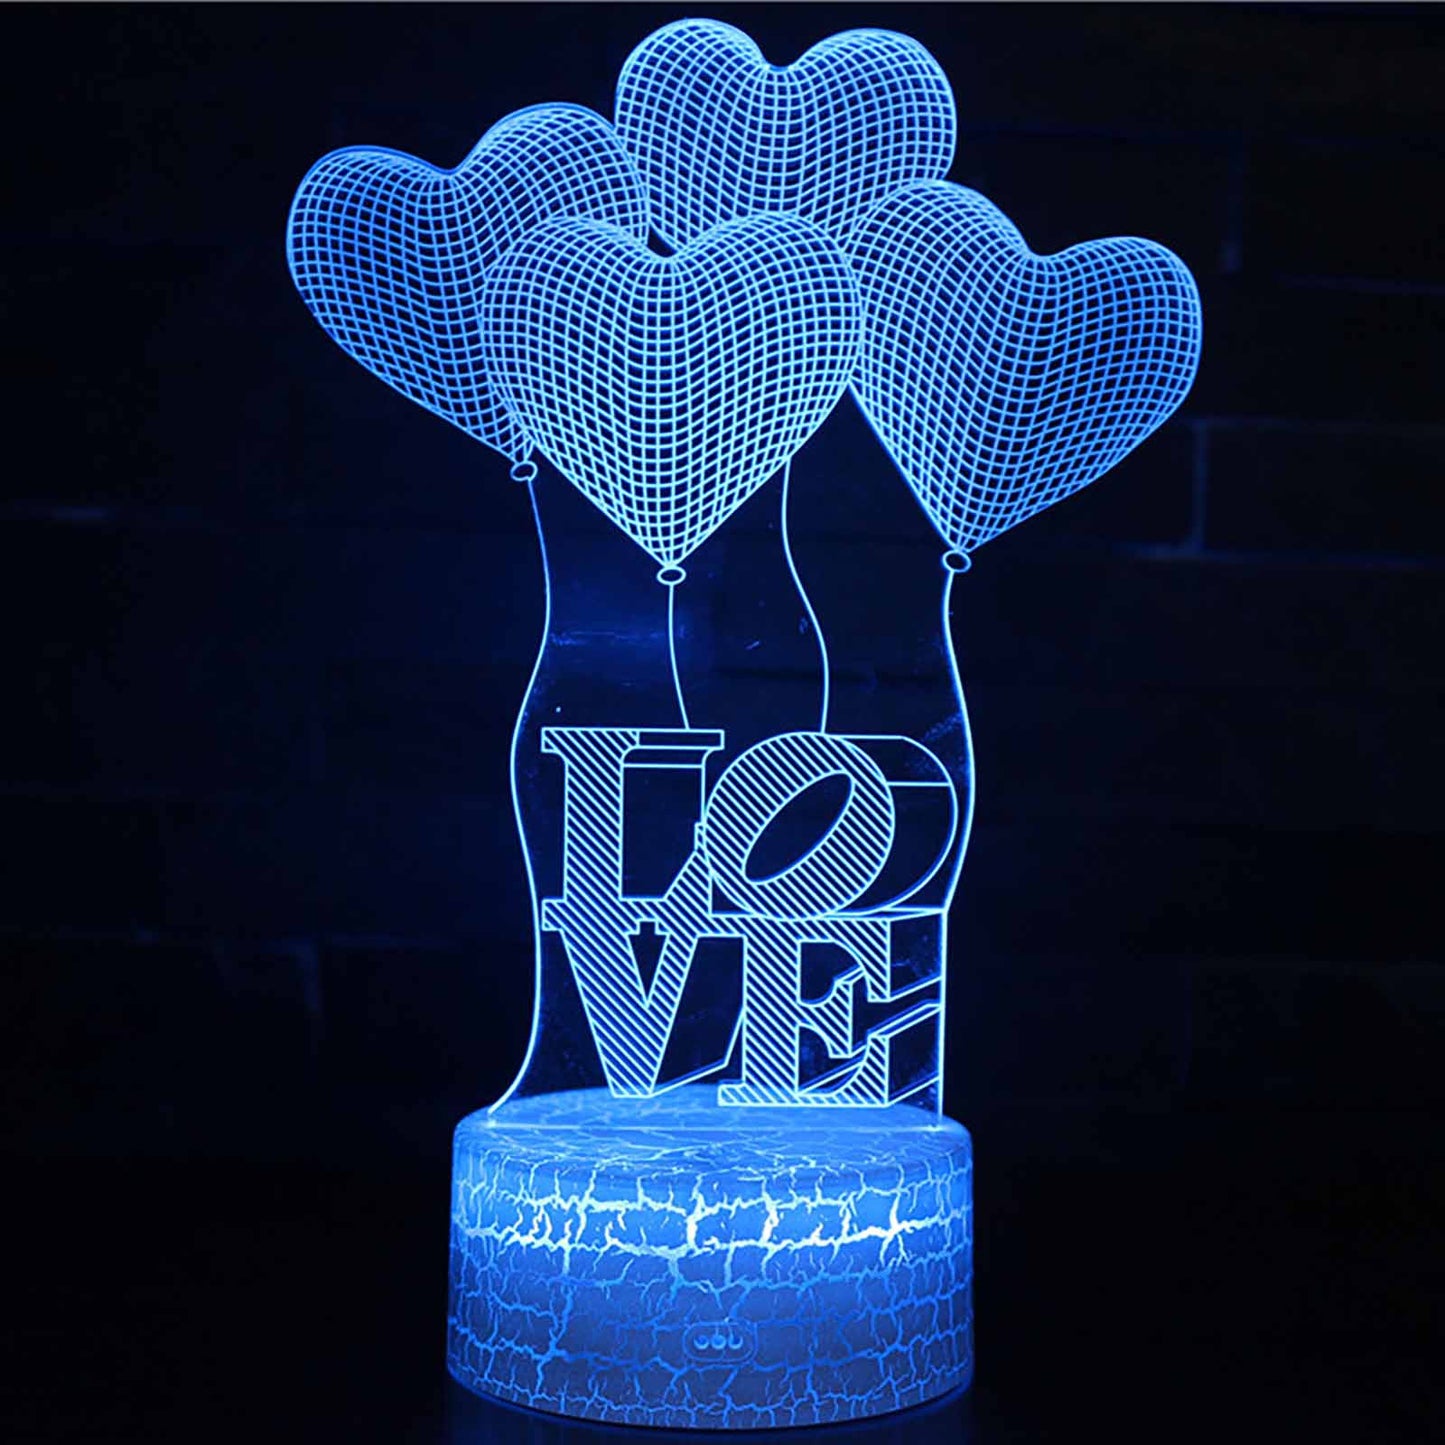 I LOVE YOU Sweet Lover Heart Balloon 3D LED USB Lamp Romantic Decorative Colorful Night Light Girlfriend Gift Mothers Day